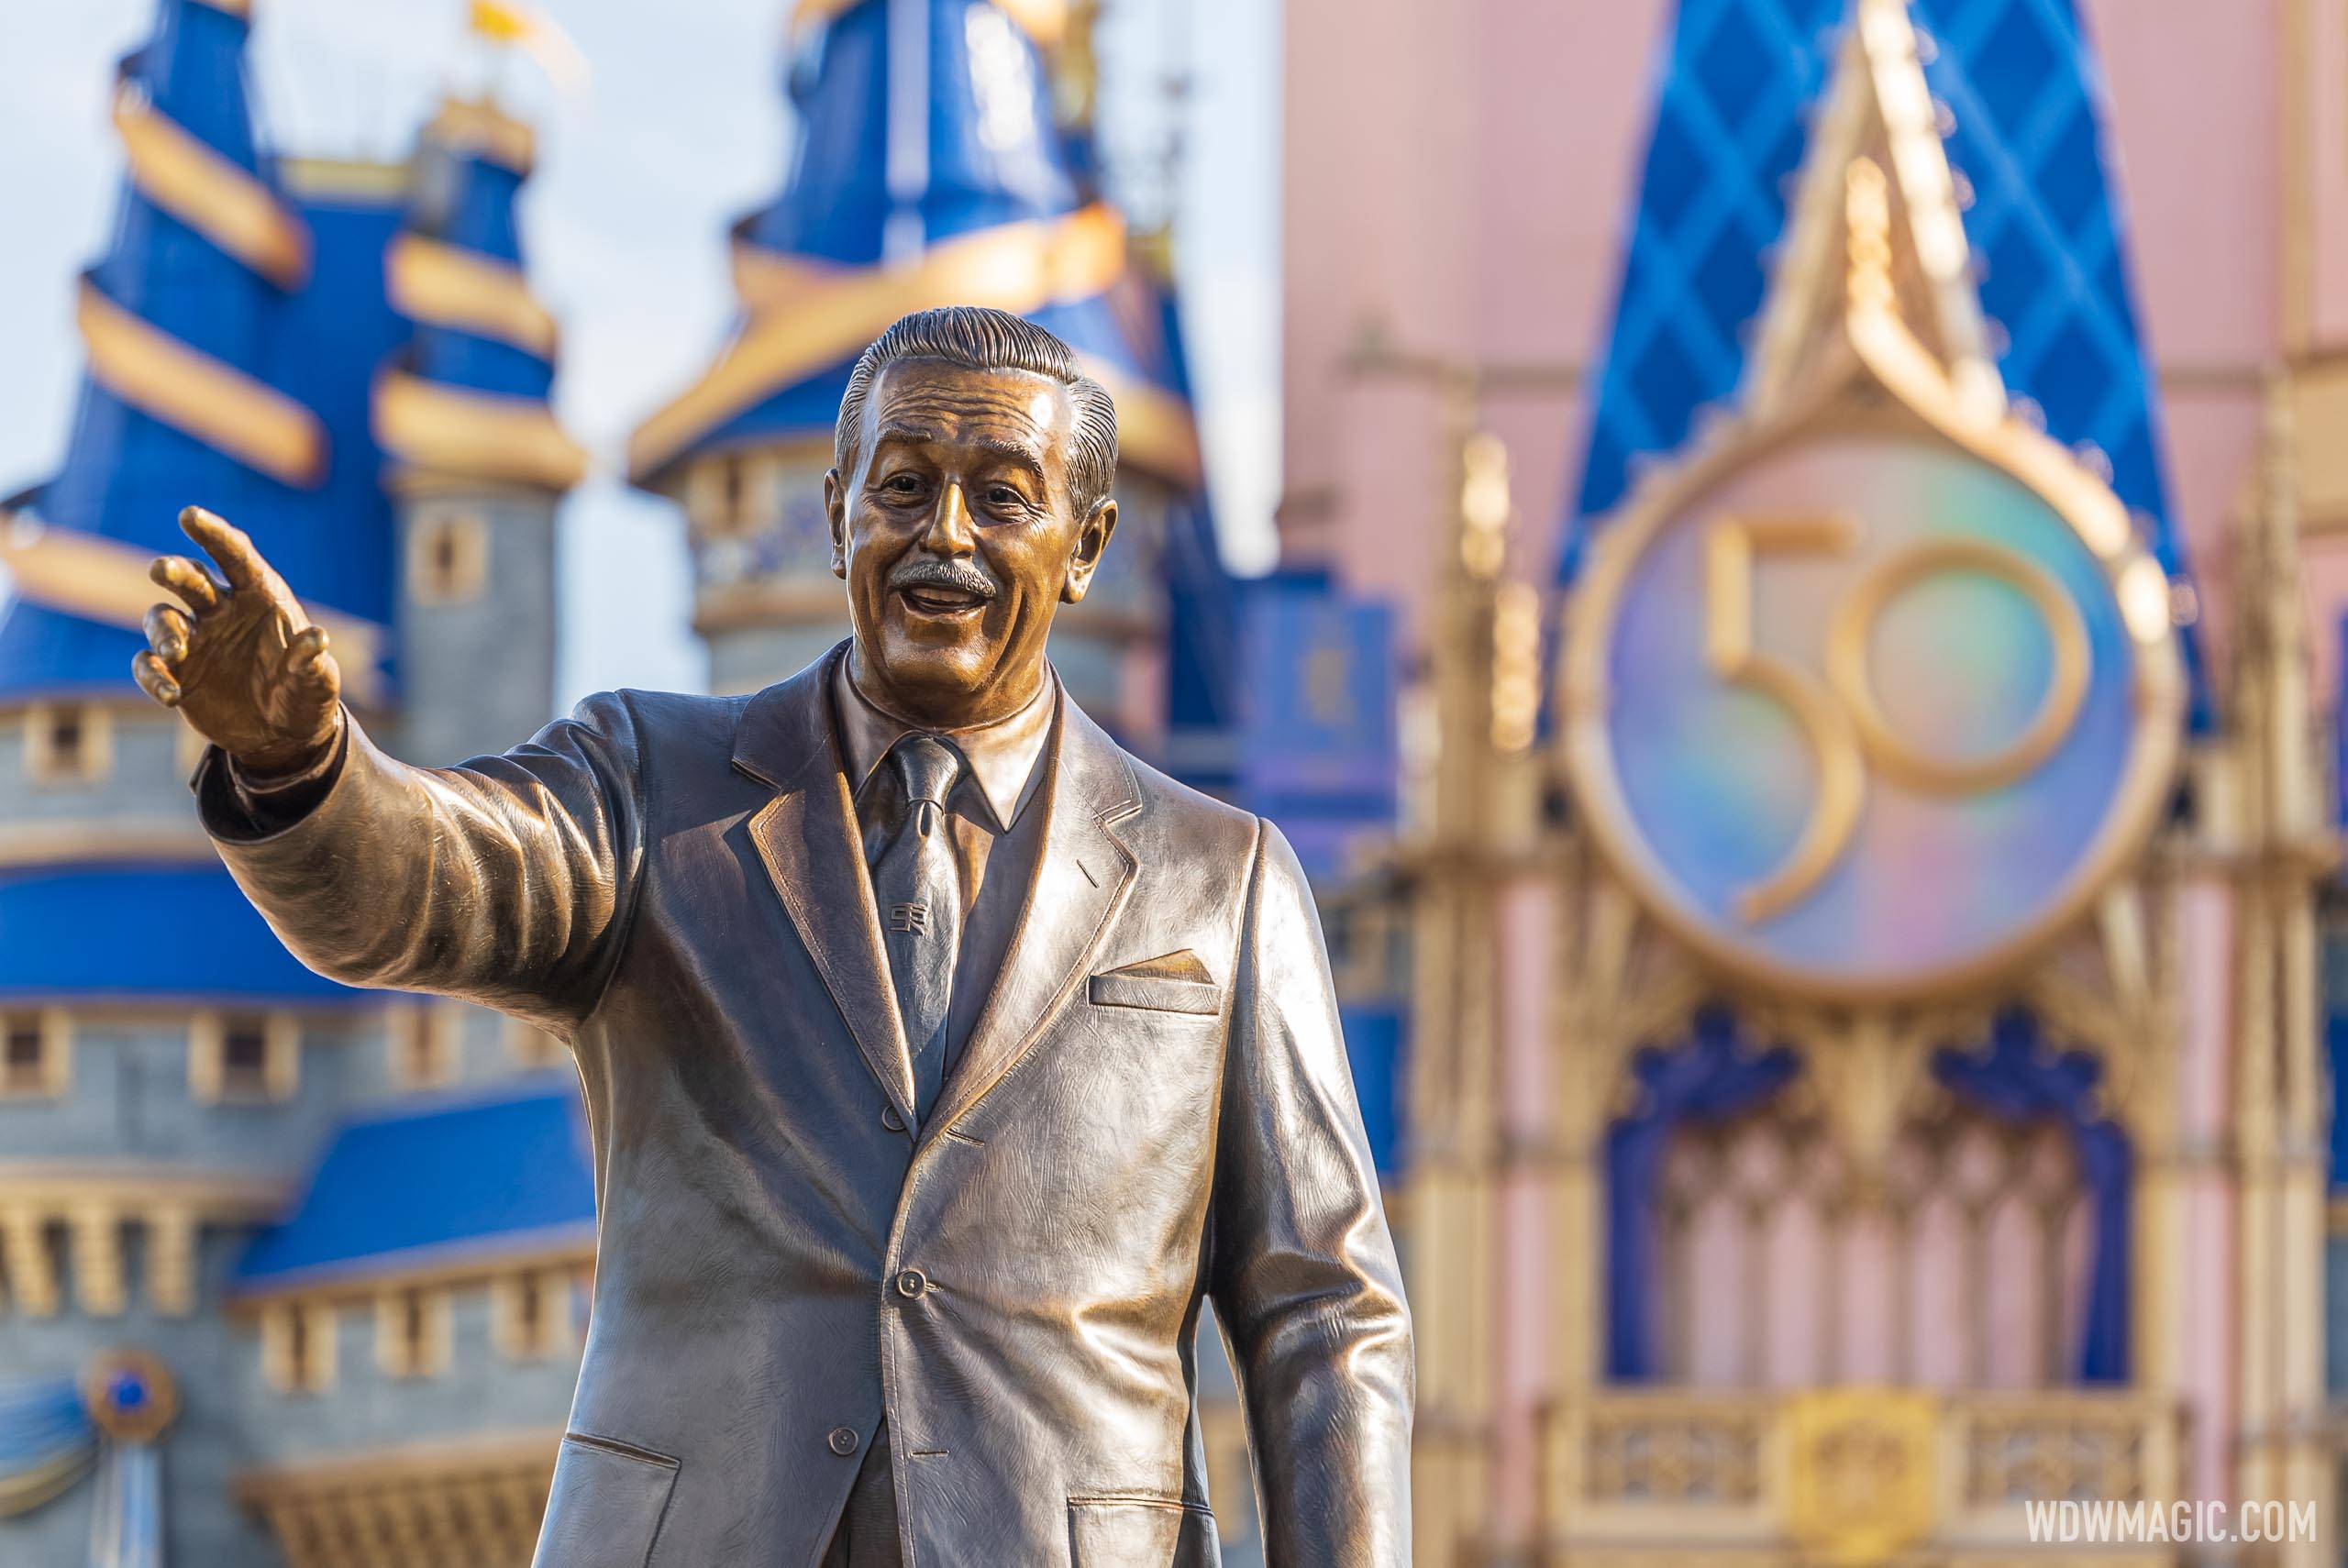 A look at the completed refurbishment of the Partners statue at Magic Kingdom